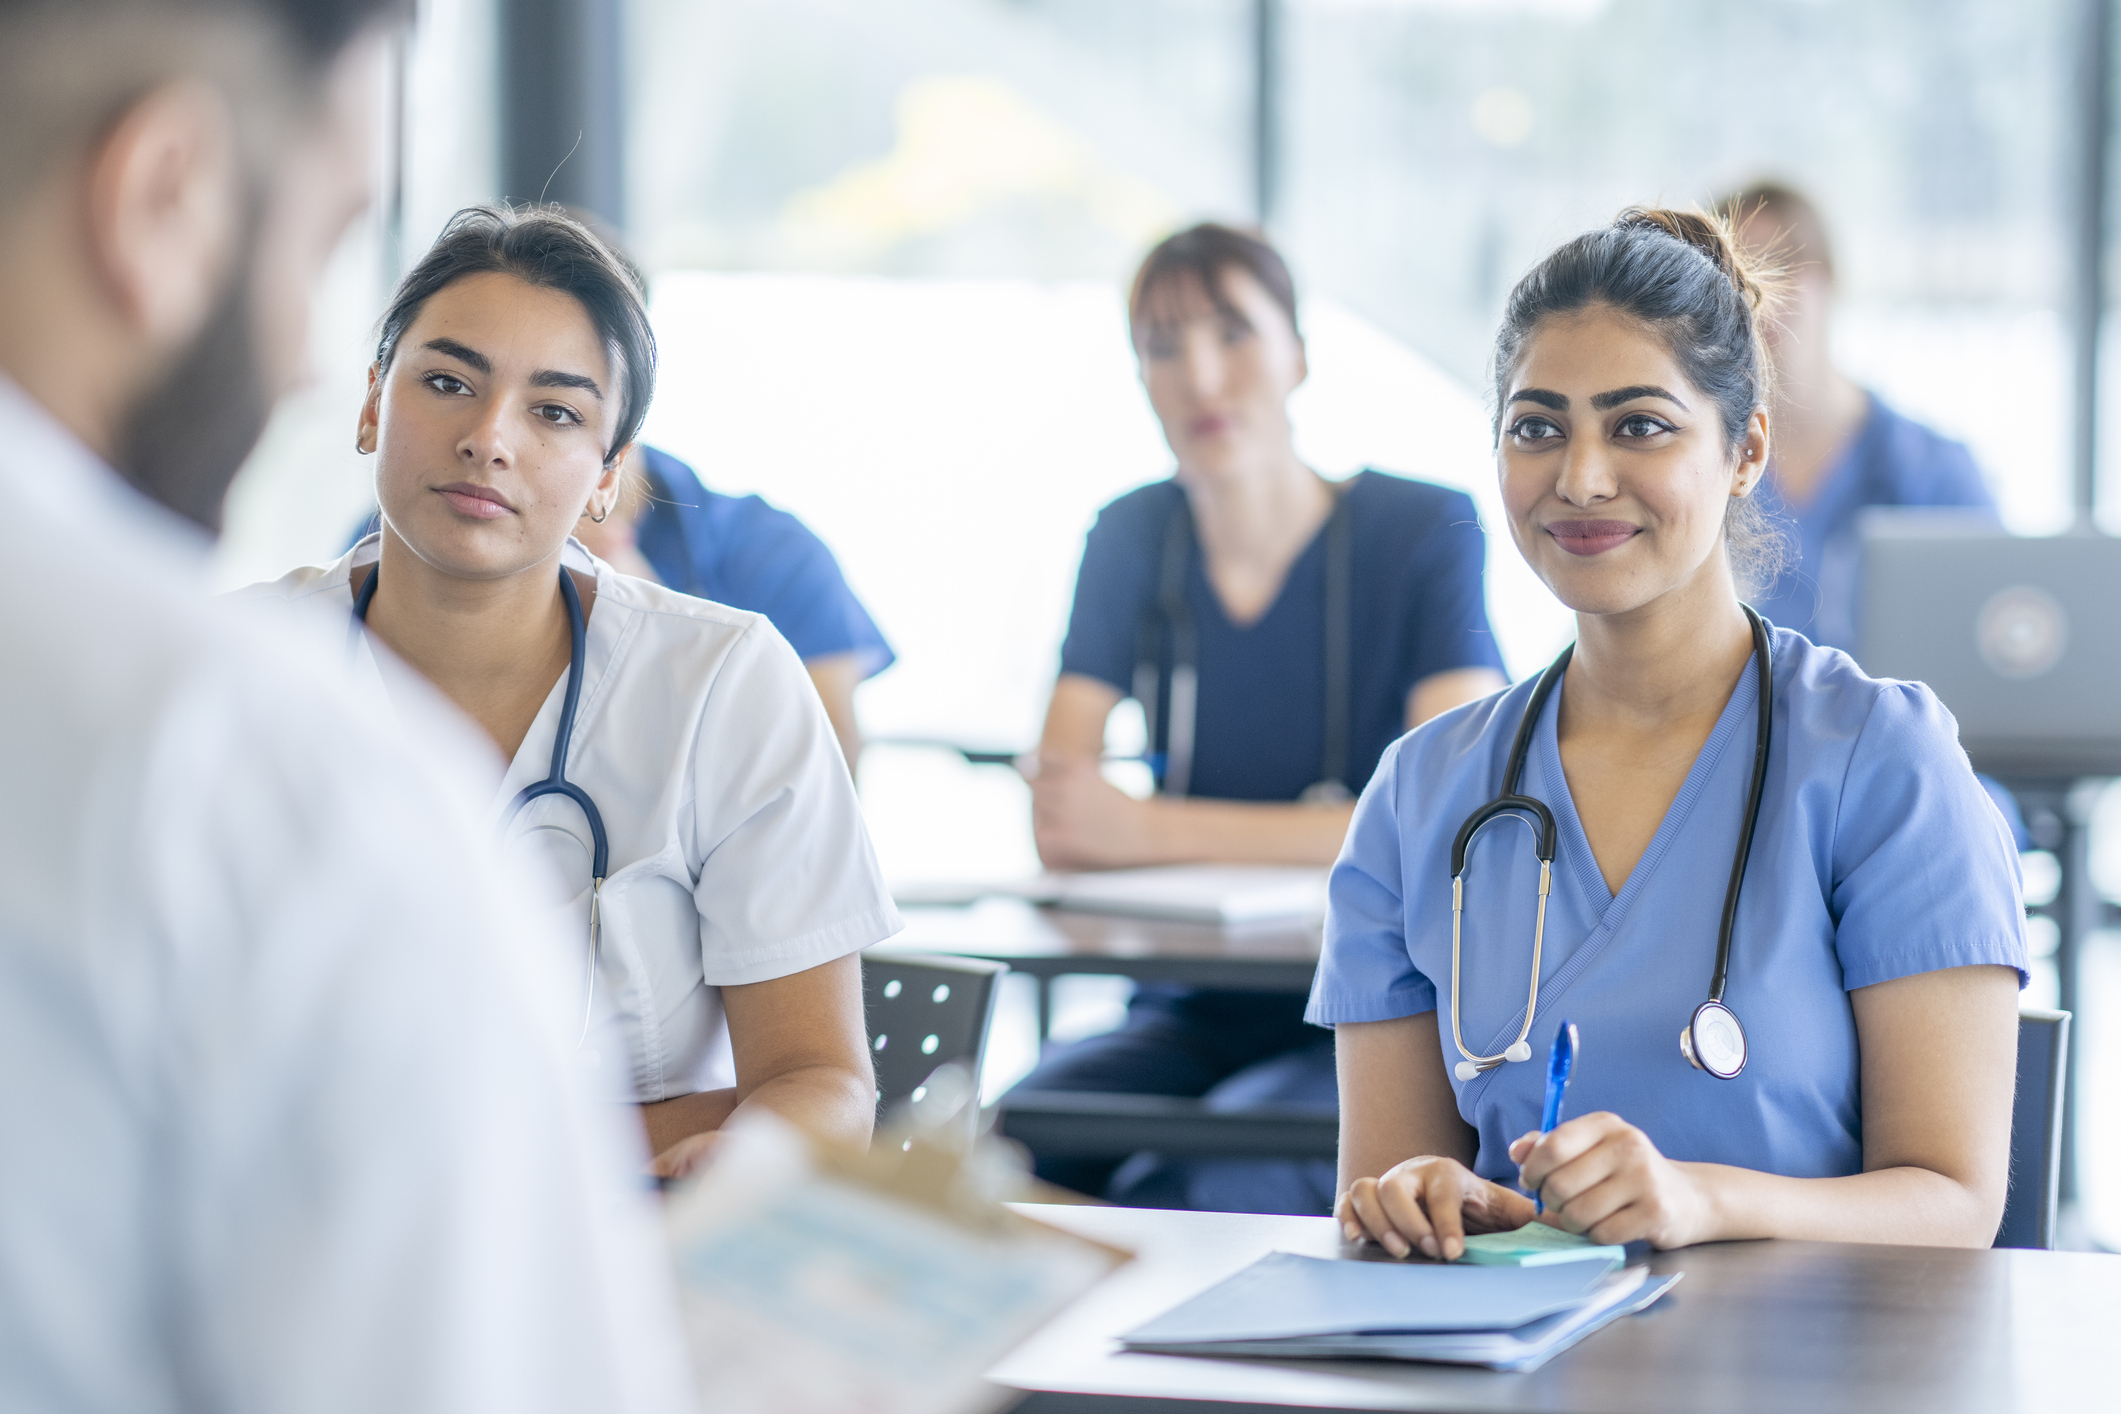 States With the Highest NCLEX Pass Rates